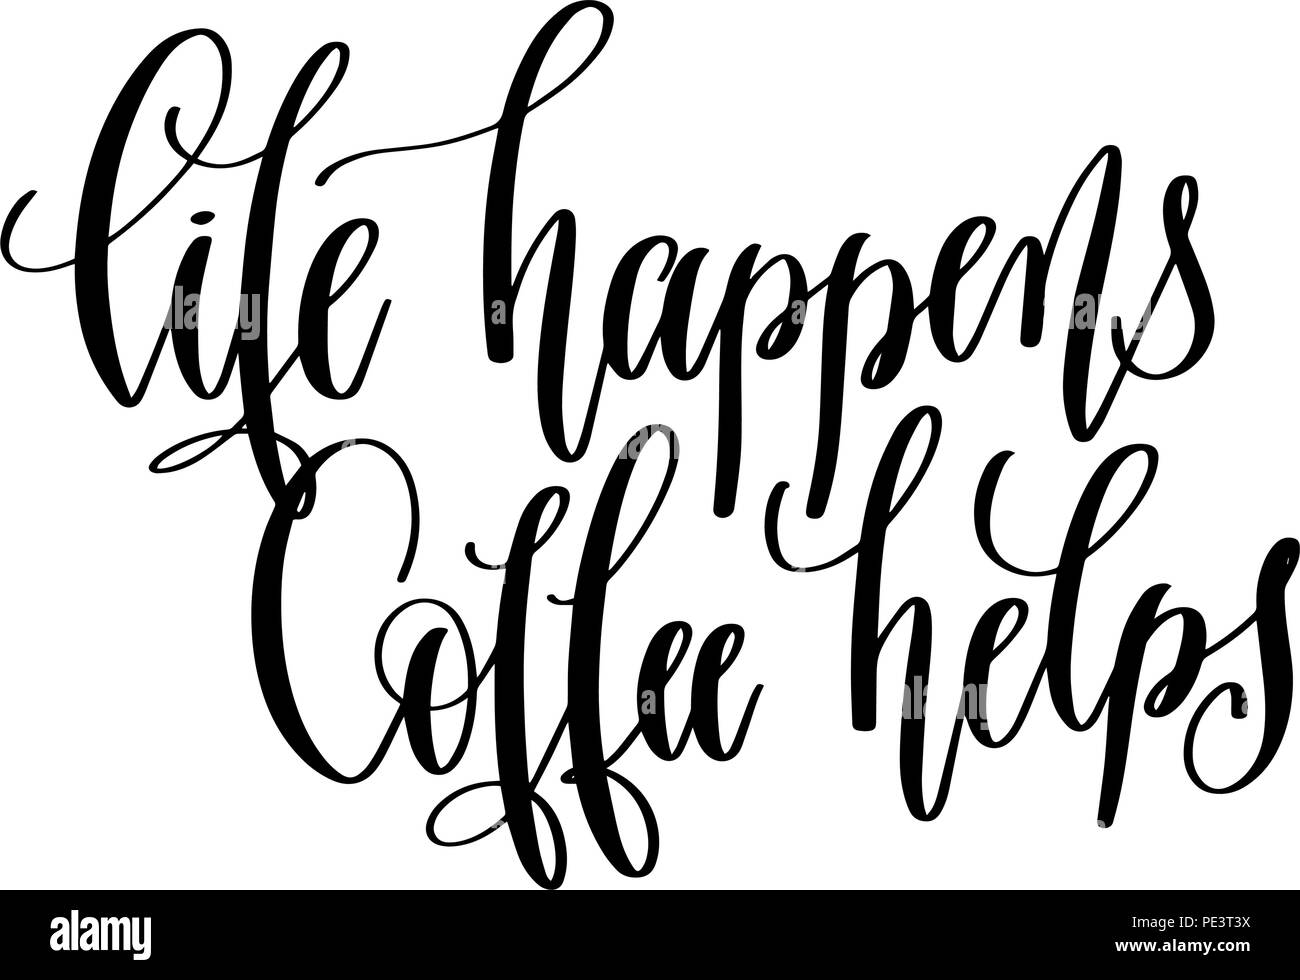 Life Happens. Coffee and sign Alamy Stock Bar & handwritten Image Vector Helps. Printable - Art for Poster topics Menu lettering. art